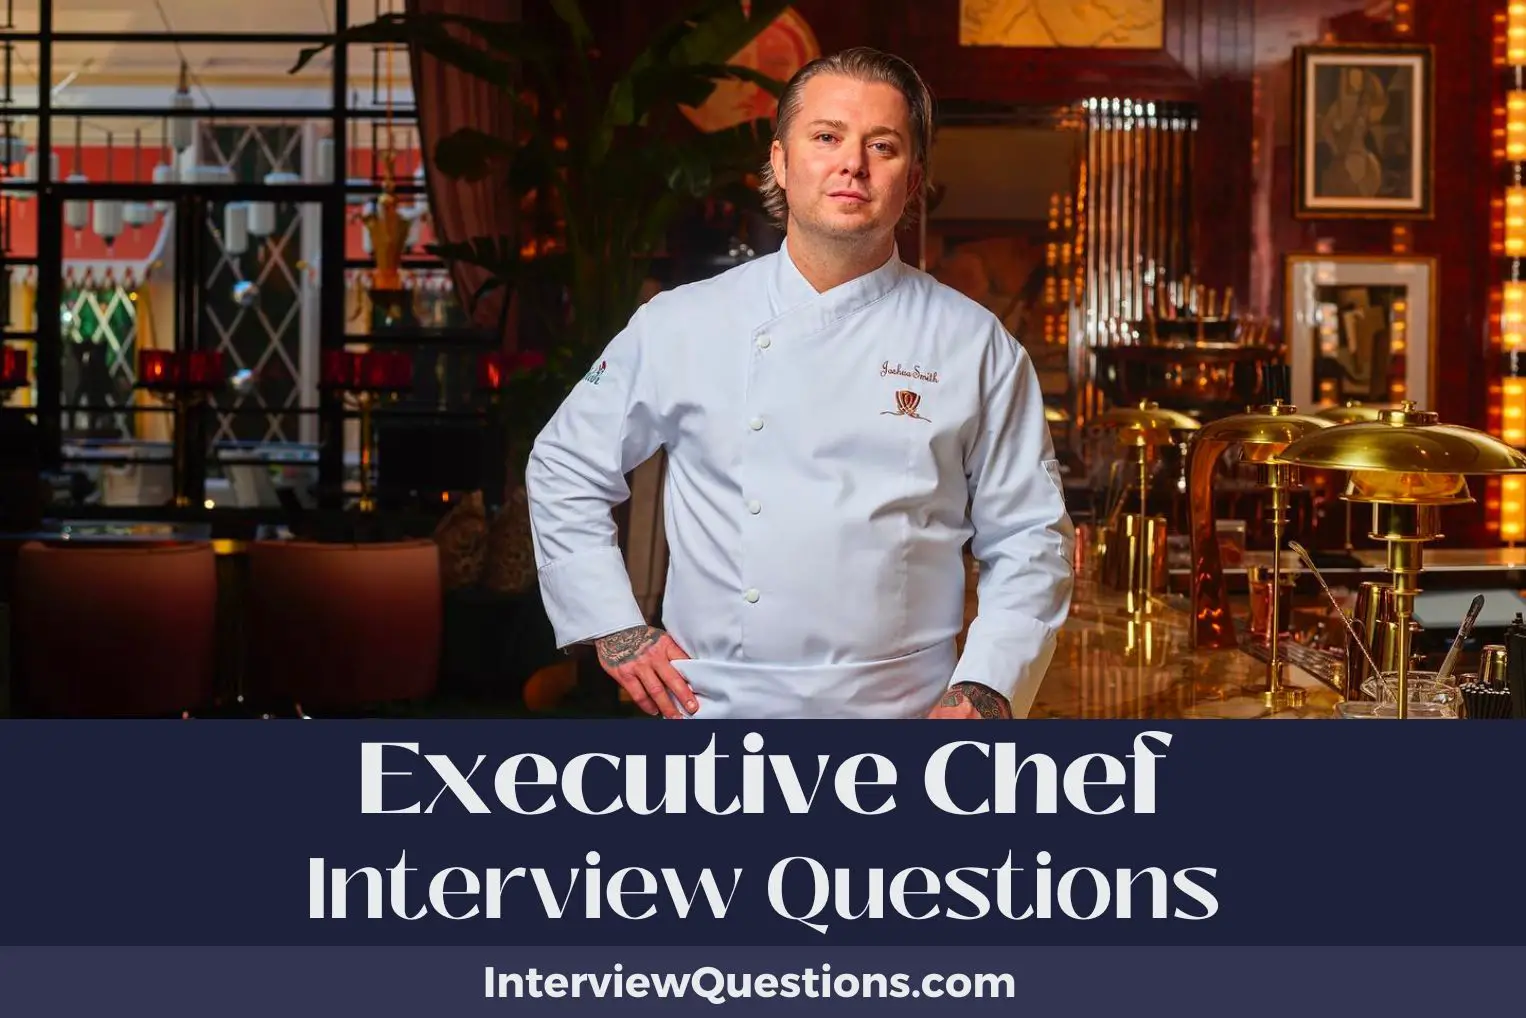 Executive Chef Interview Questions